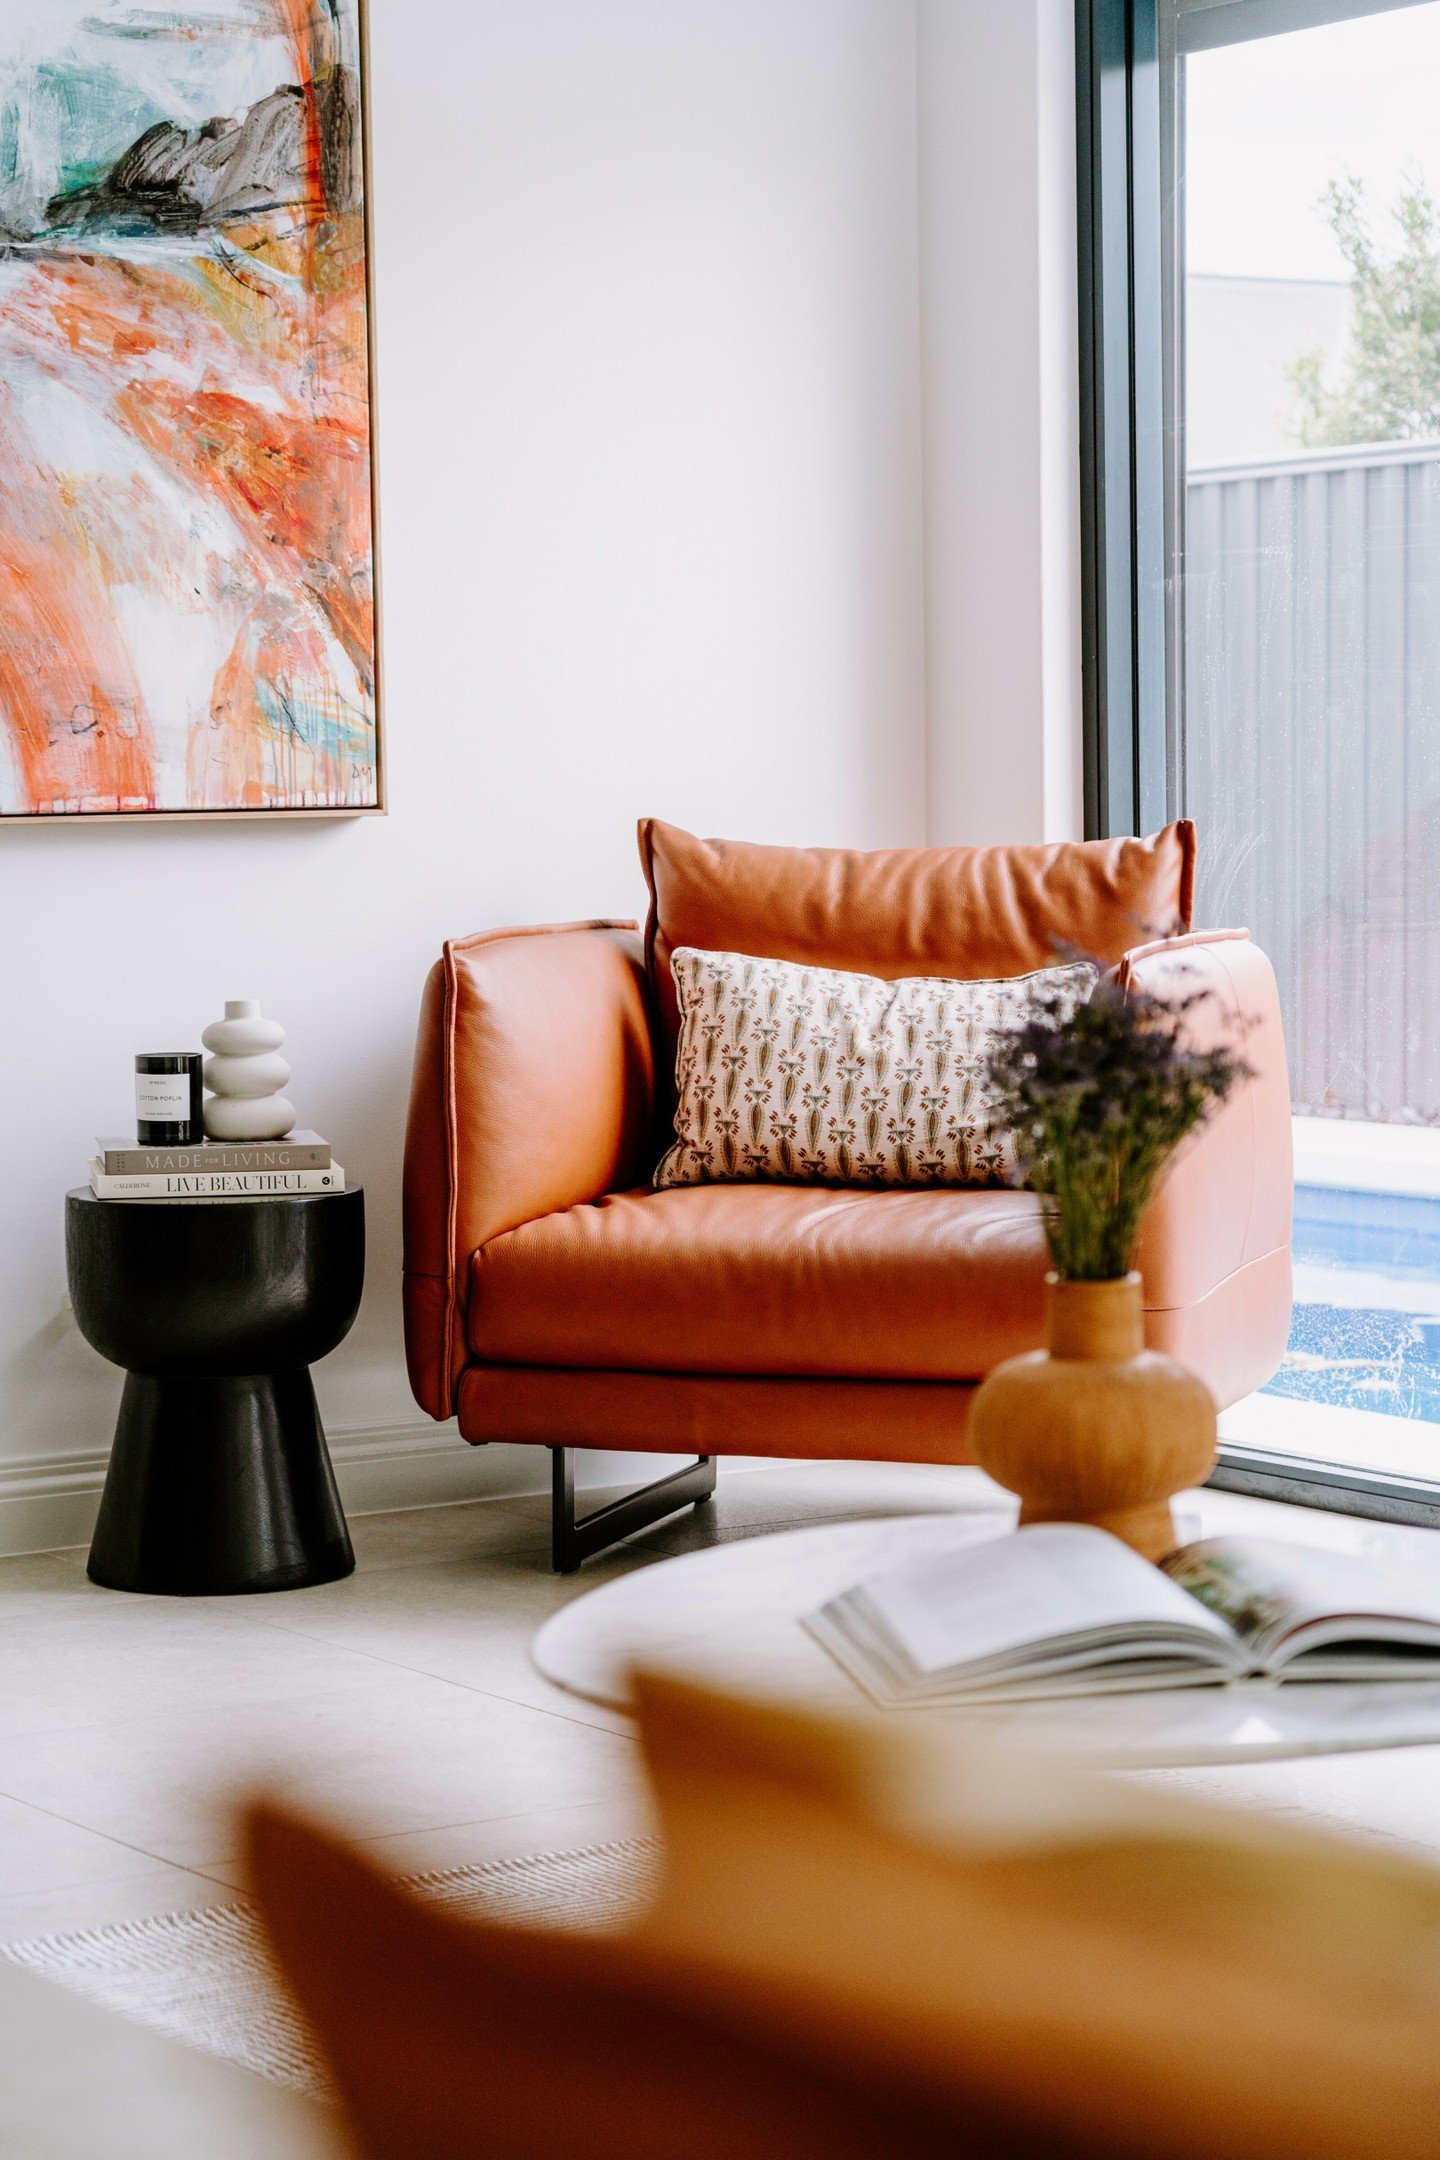 ✨ Create Your Dream Reading Nook! ✨

Ever dreamed of a little corner where the world slips away as you dive into your favourite books? 🌟 Here&rsquo;s how you can create a cozy reading nook in your own space!

Find Your Spot - Choose a quiet corner w